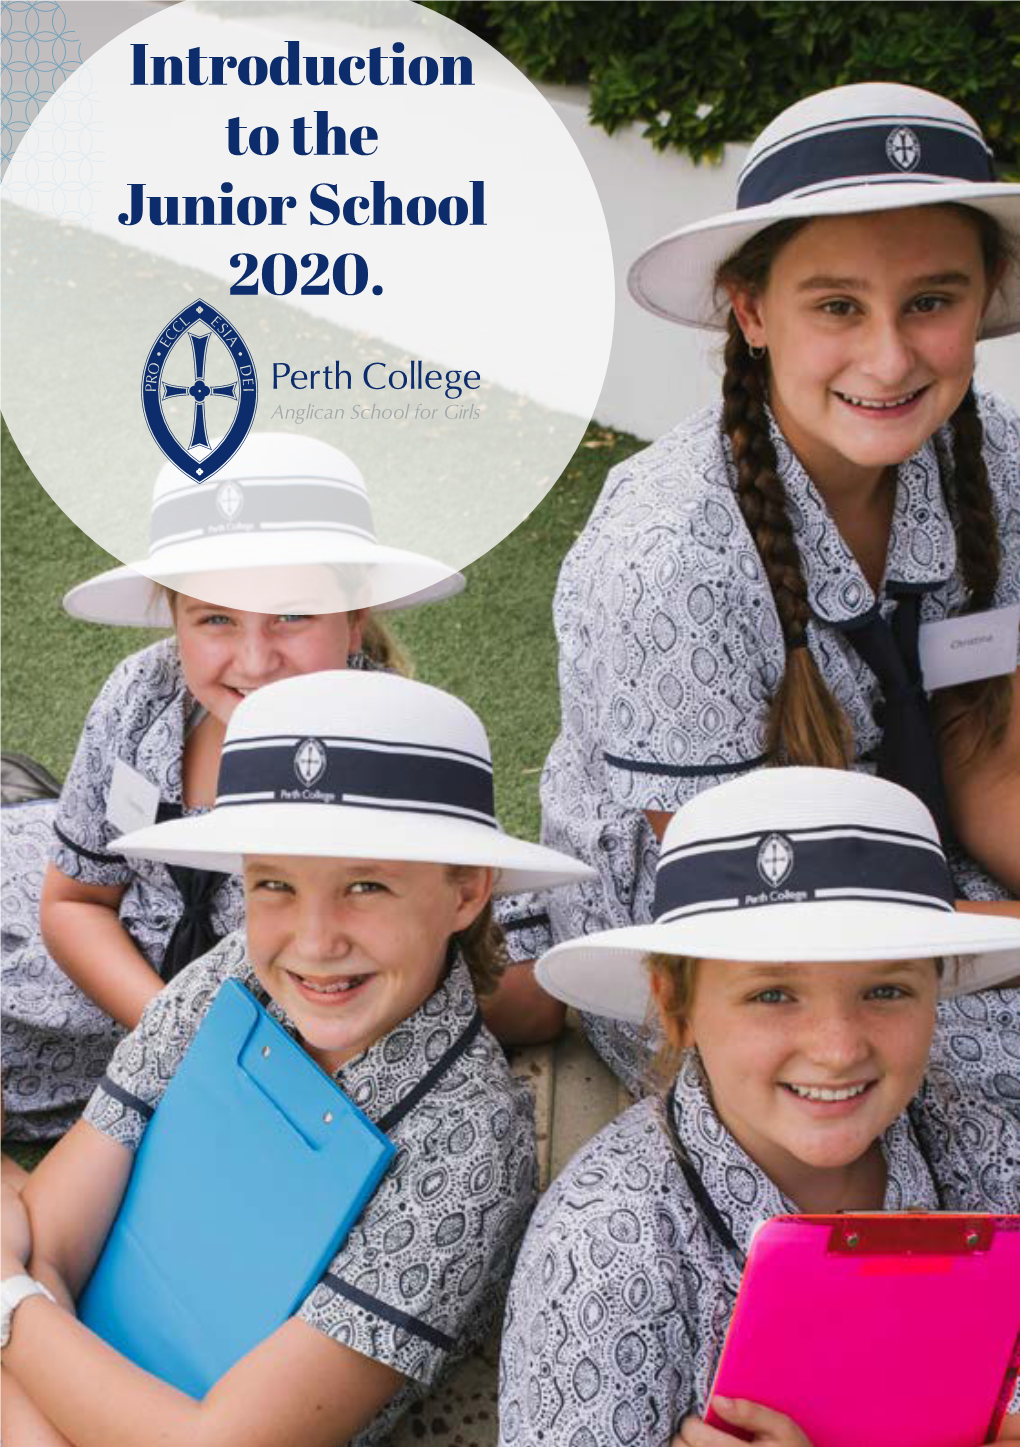 Introduction to the Junior School 2020